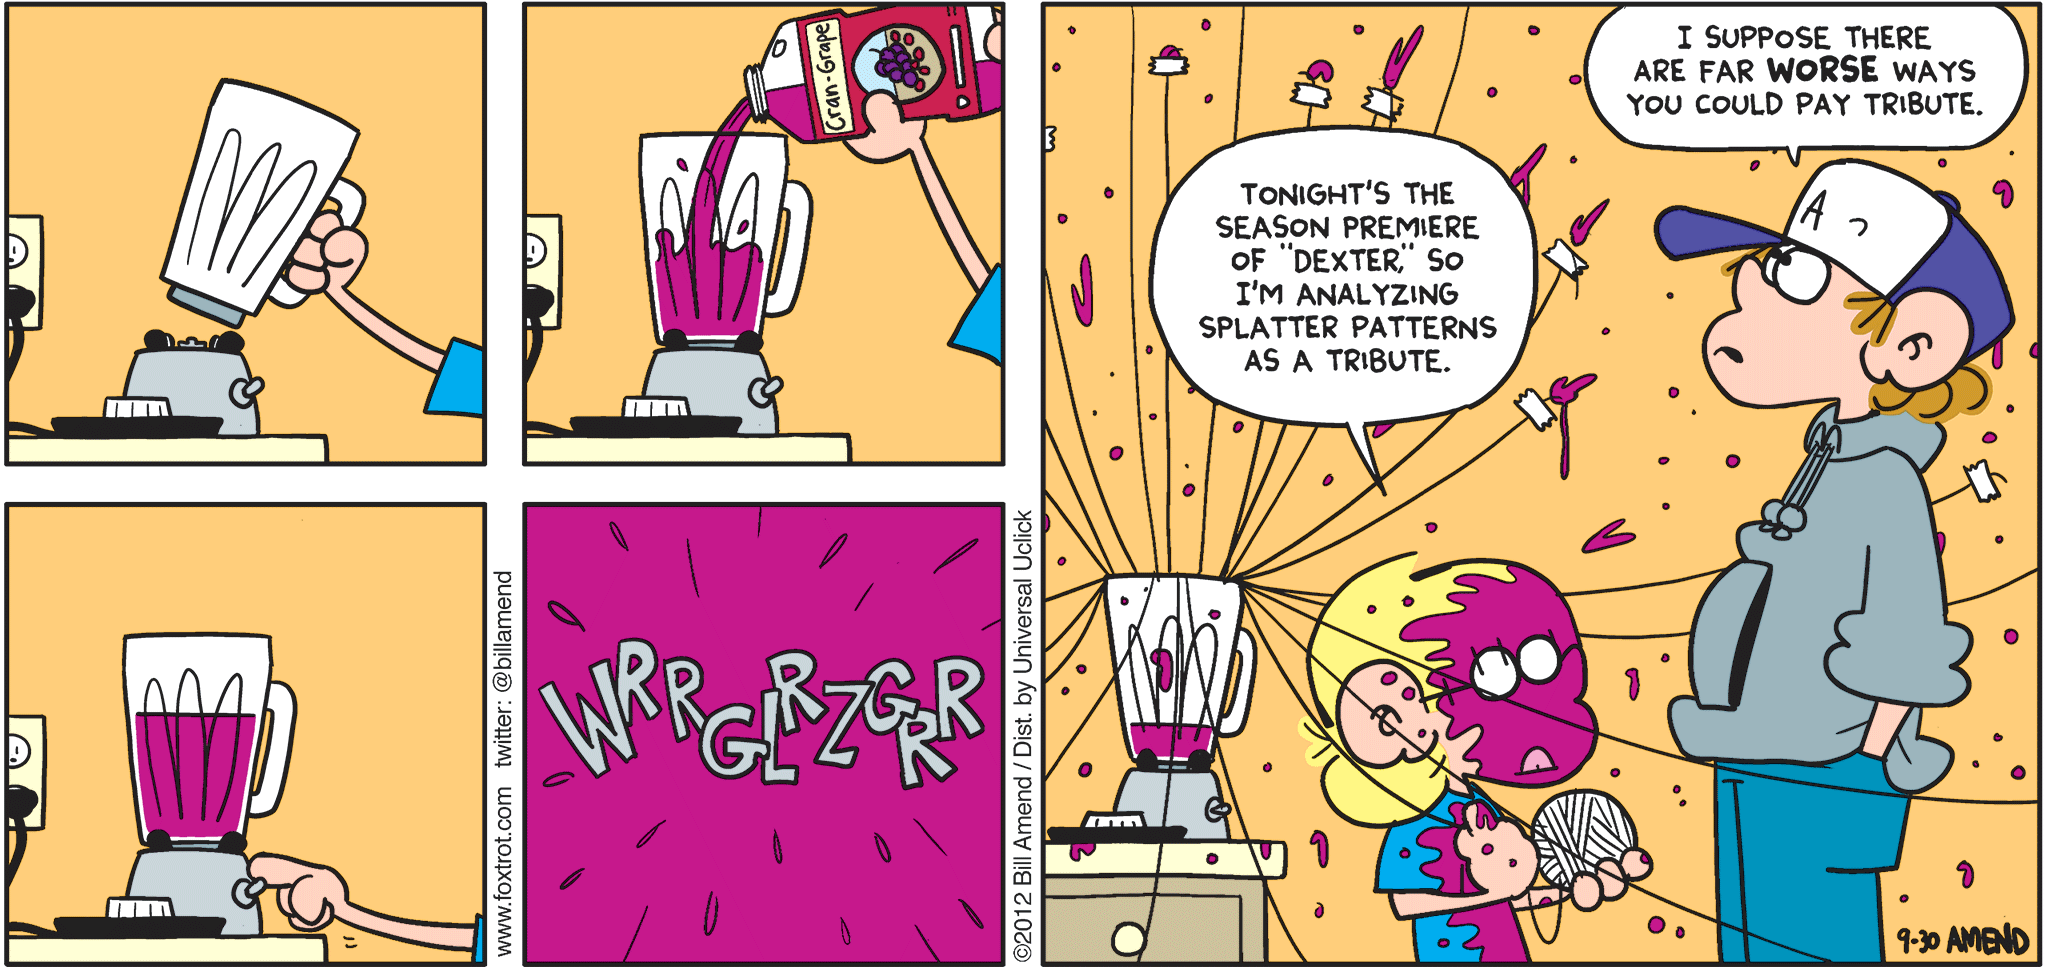 FoxTrot comic strip by Bill Amend - "Dexterous" published September 30, 2012 - Jason: Tonight's the season premiere of "Dexter," so I'm analyzing splatter patterns as a tribute. Peter: I suppose there are far WORSE ways you could pay tribute.